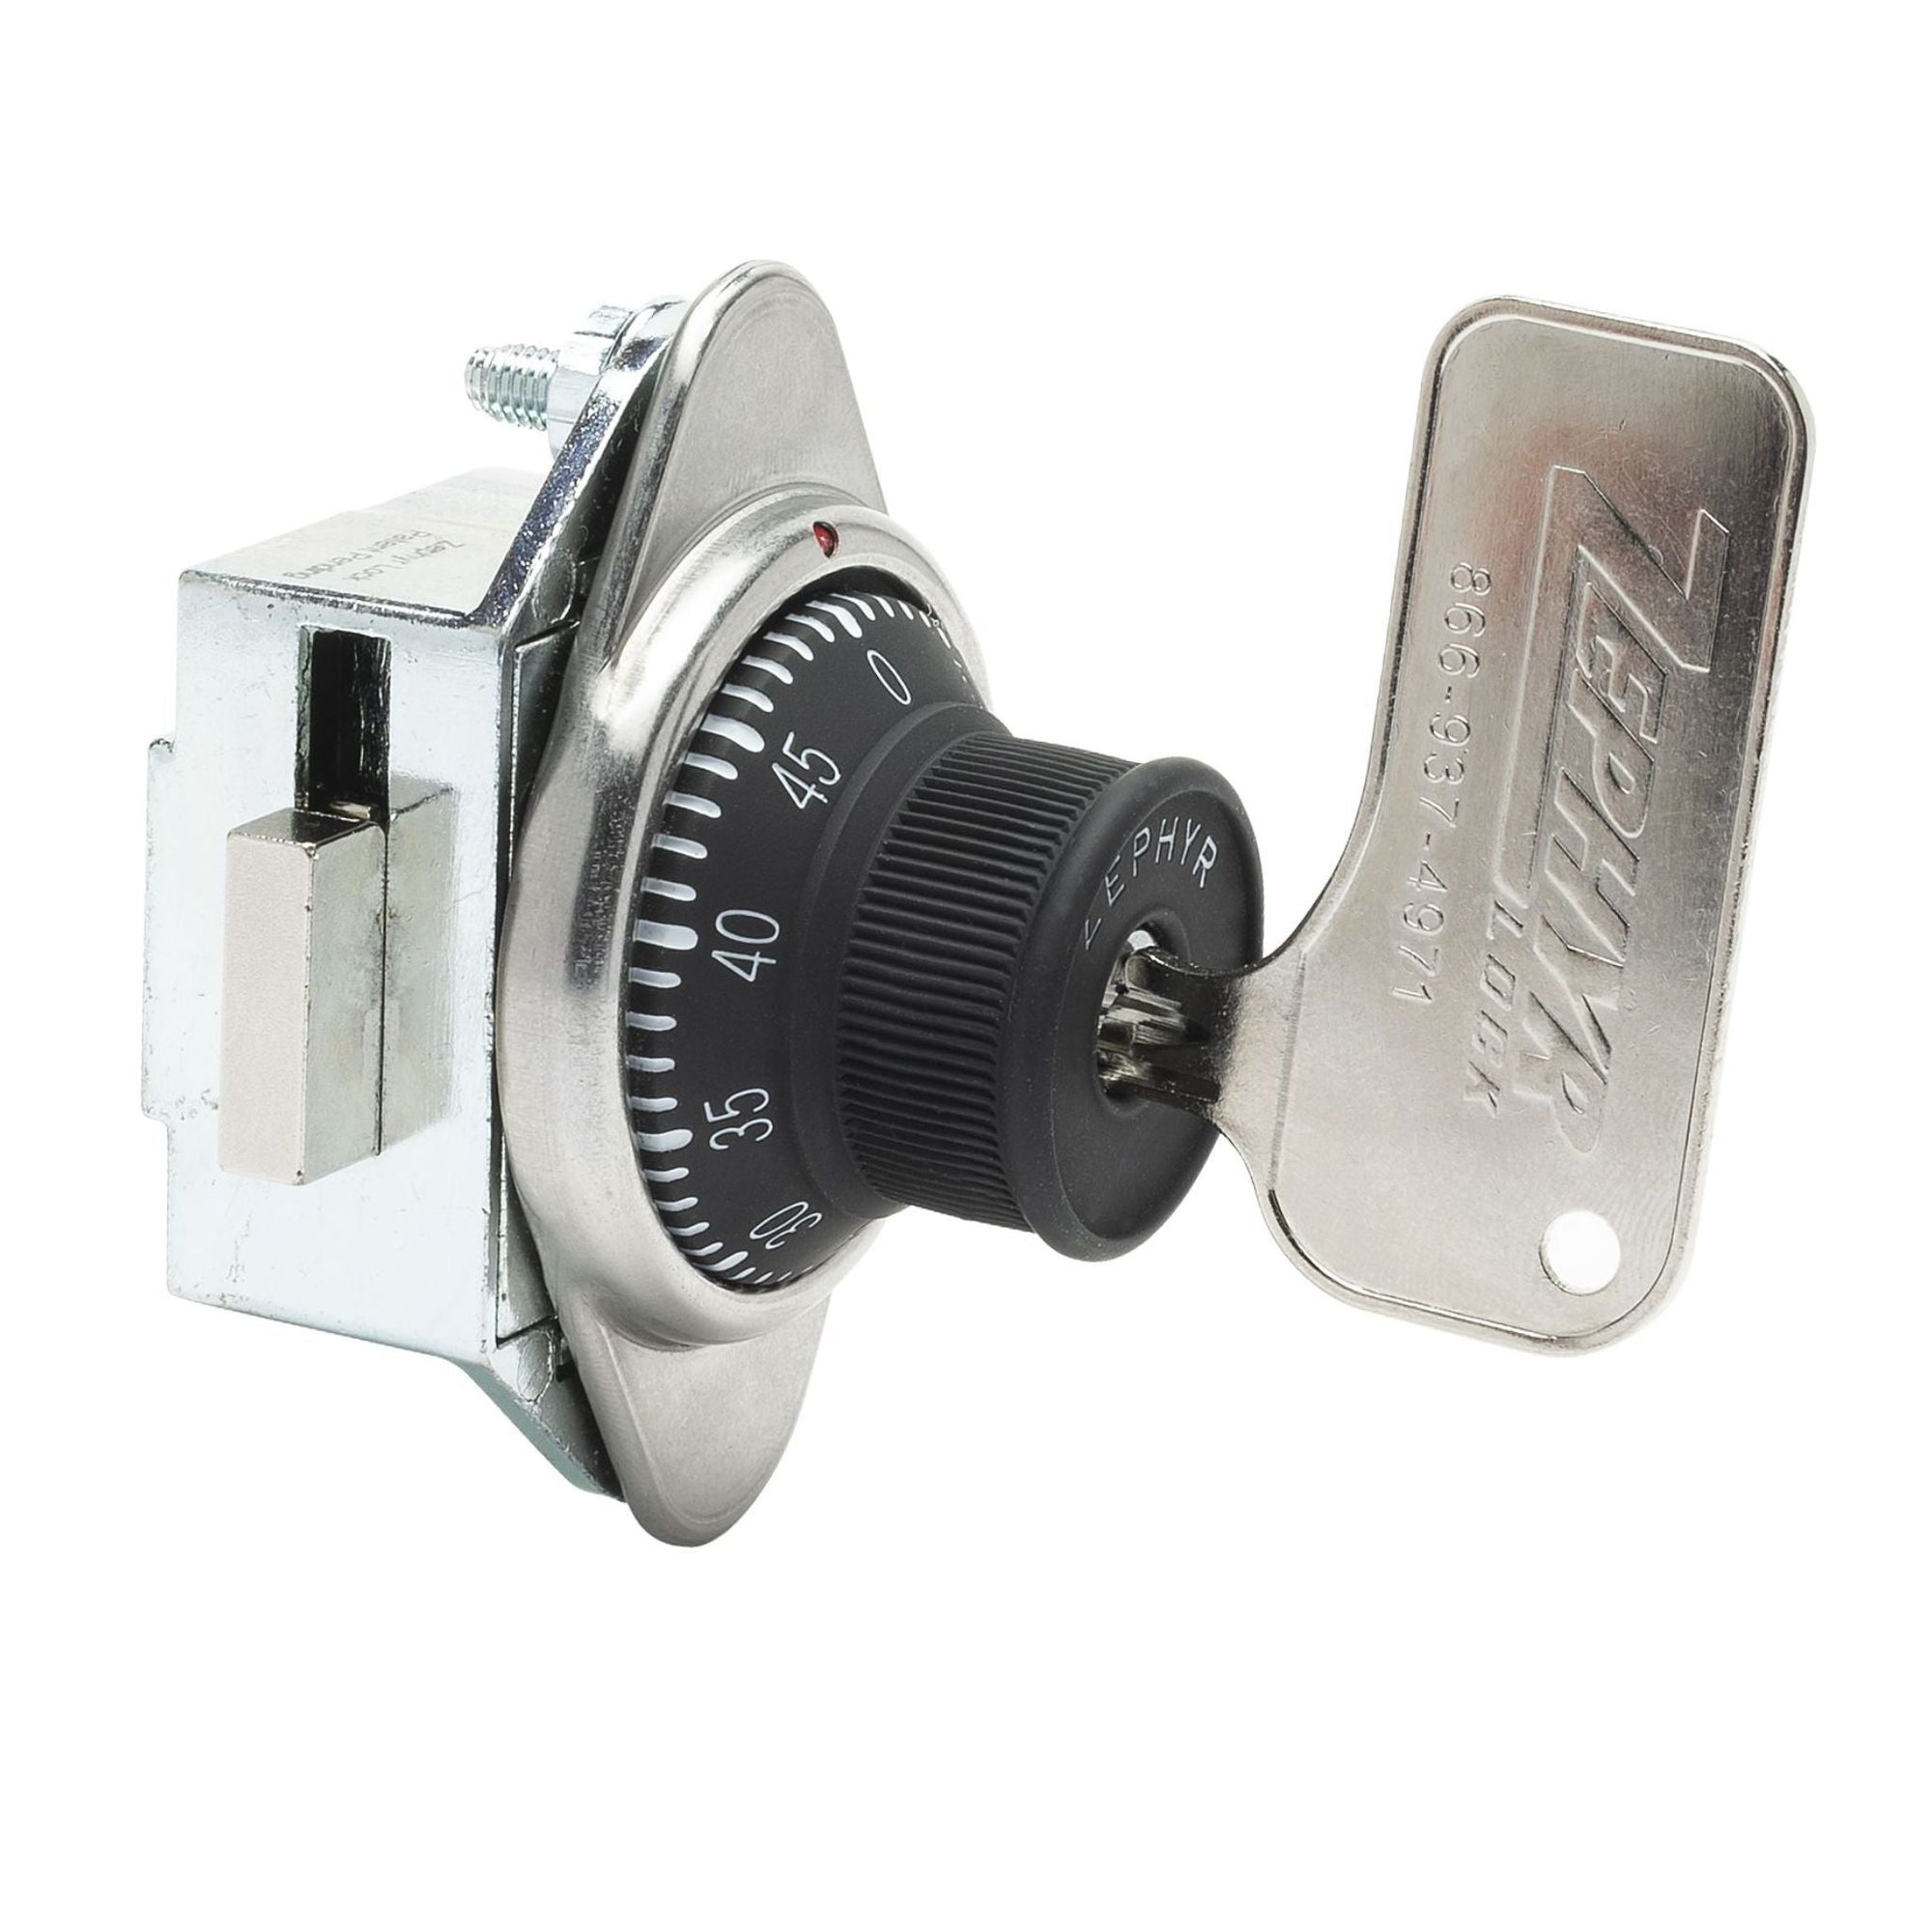 Zephyr 1930ADA RH ADA-Compliant Built-In Combination Locker Locks With Key Control Override for Supervisory Access - The Lock Source